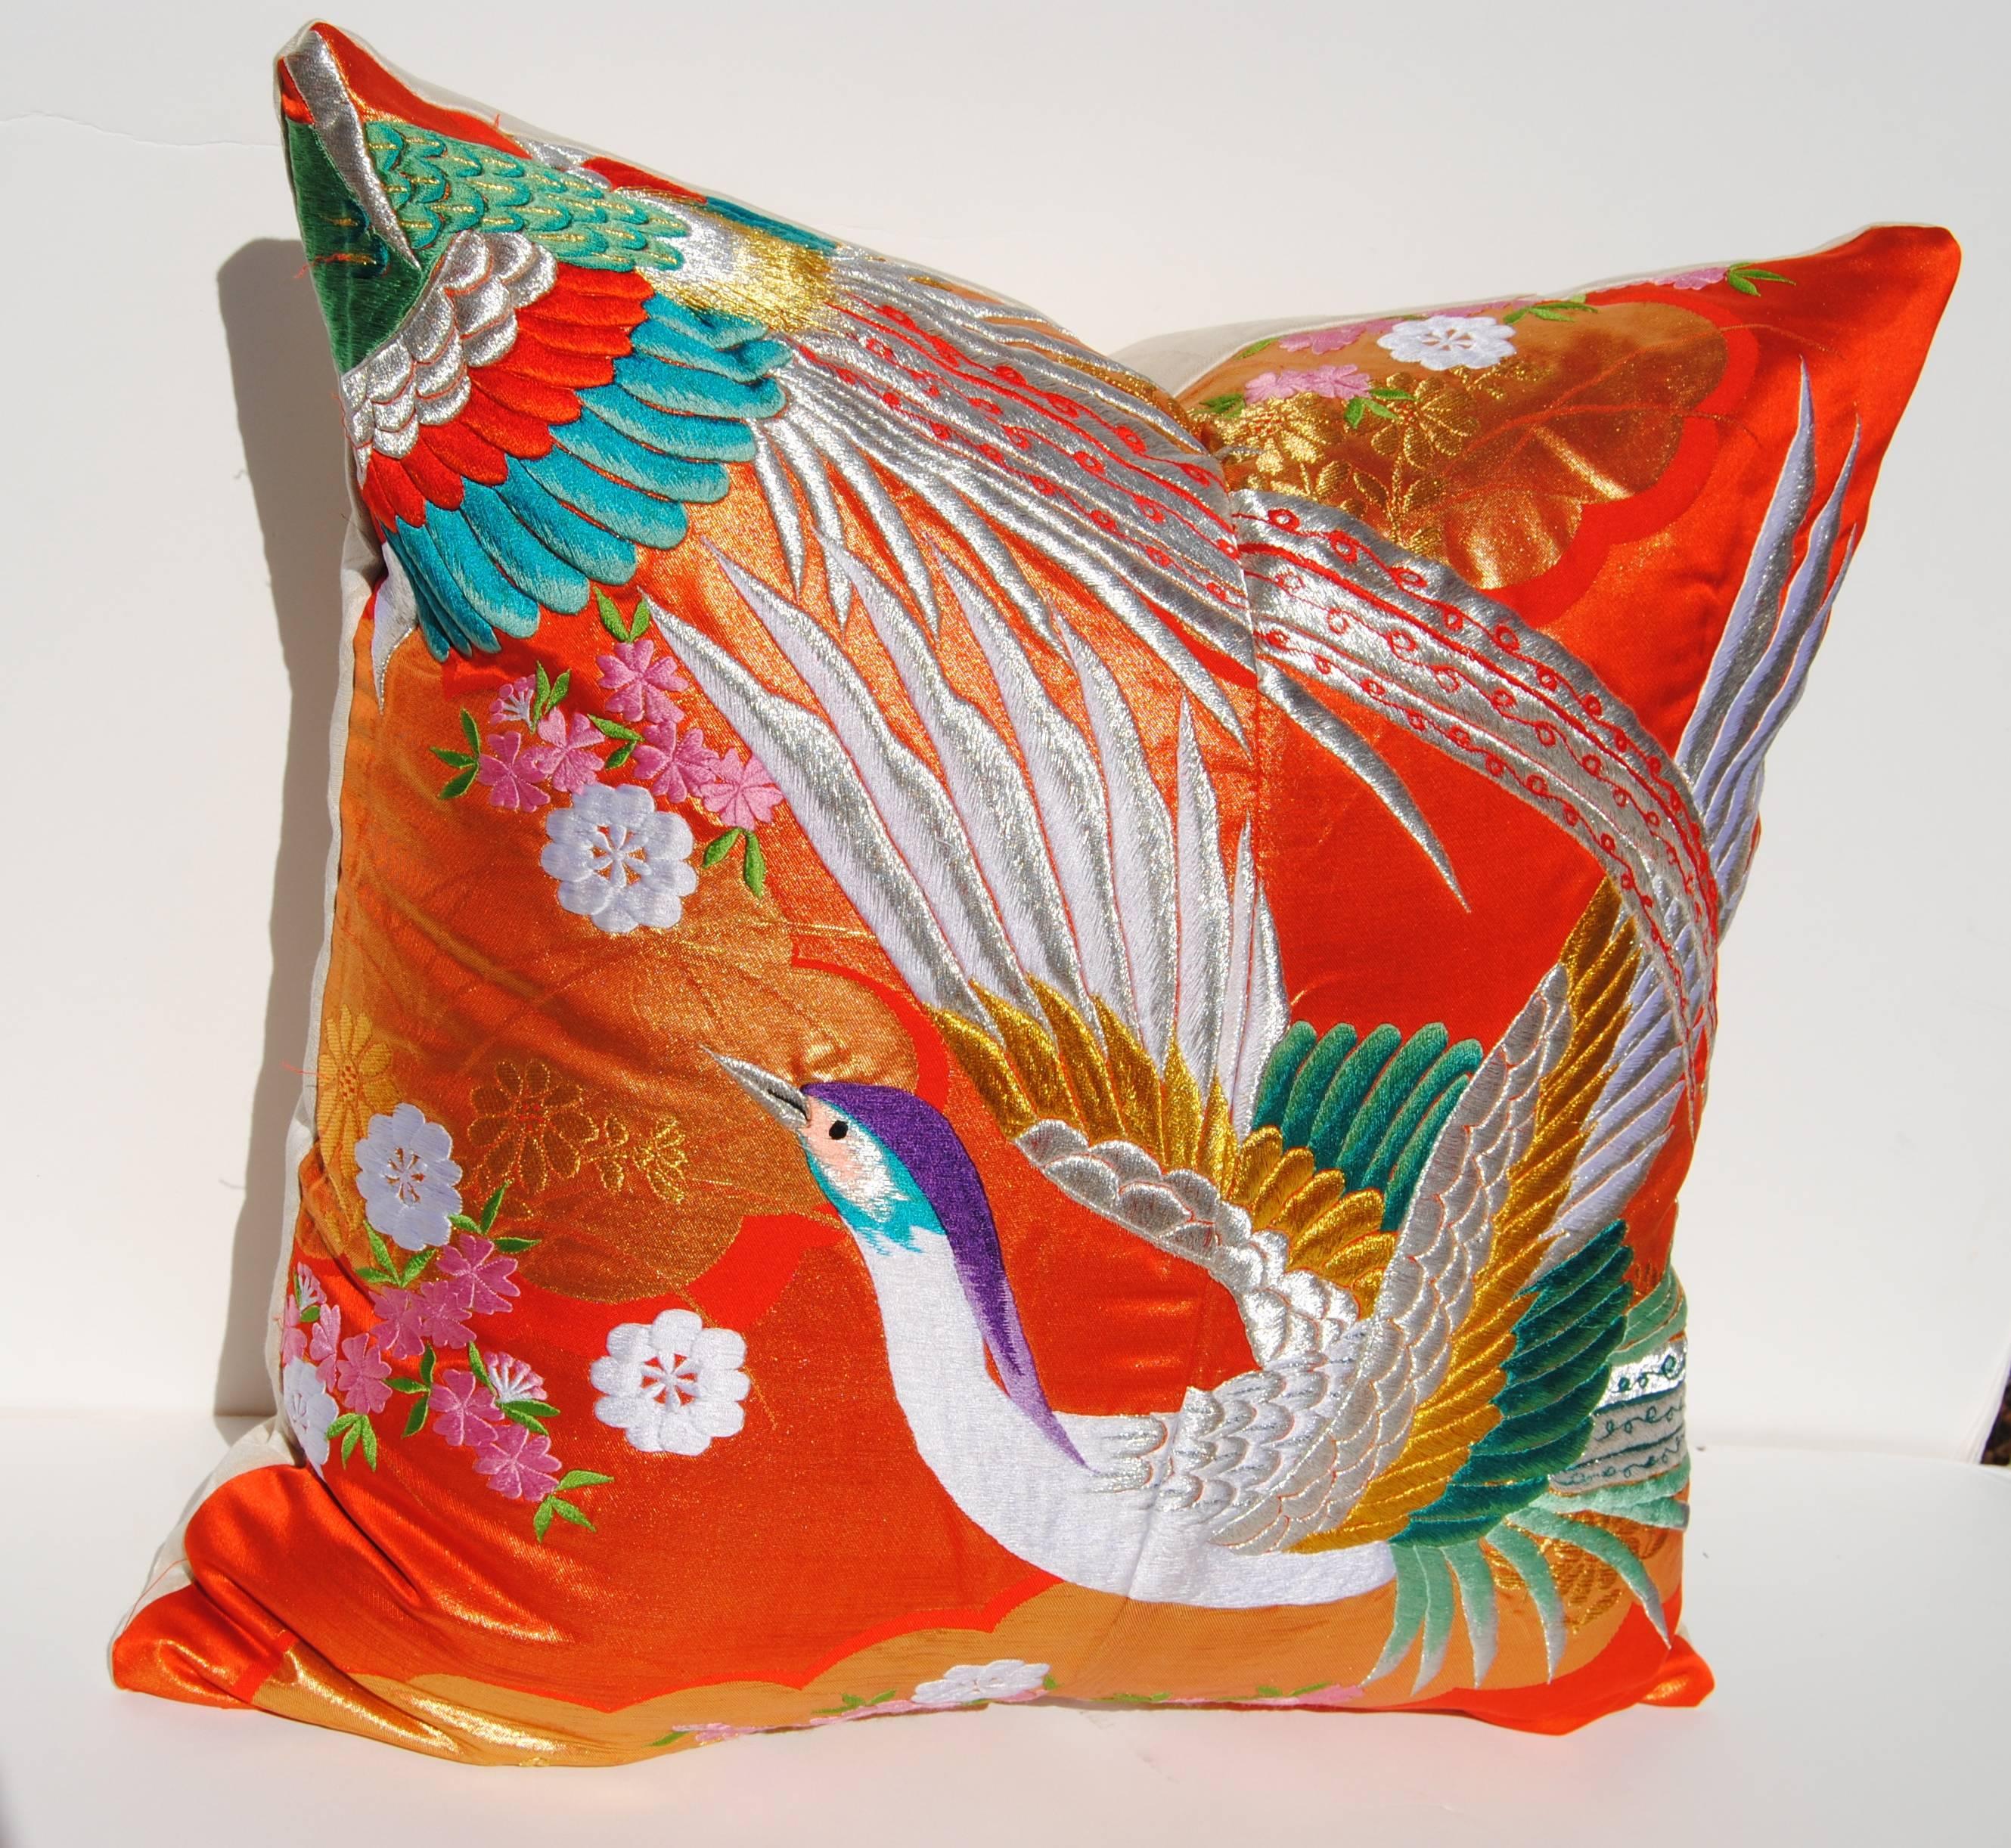 Custom pillow cut from a vintage Japanese silk Uchikake, the traditional wedding kimono. The silk is embroidered with metallic and silk threads in vibrant colors. Pillow is backed in Scalamandre silk/linen, filled with an insert of 50/50 down and